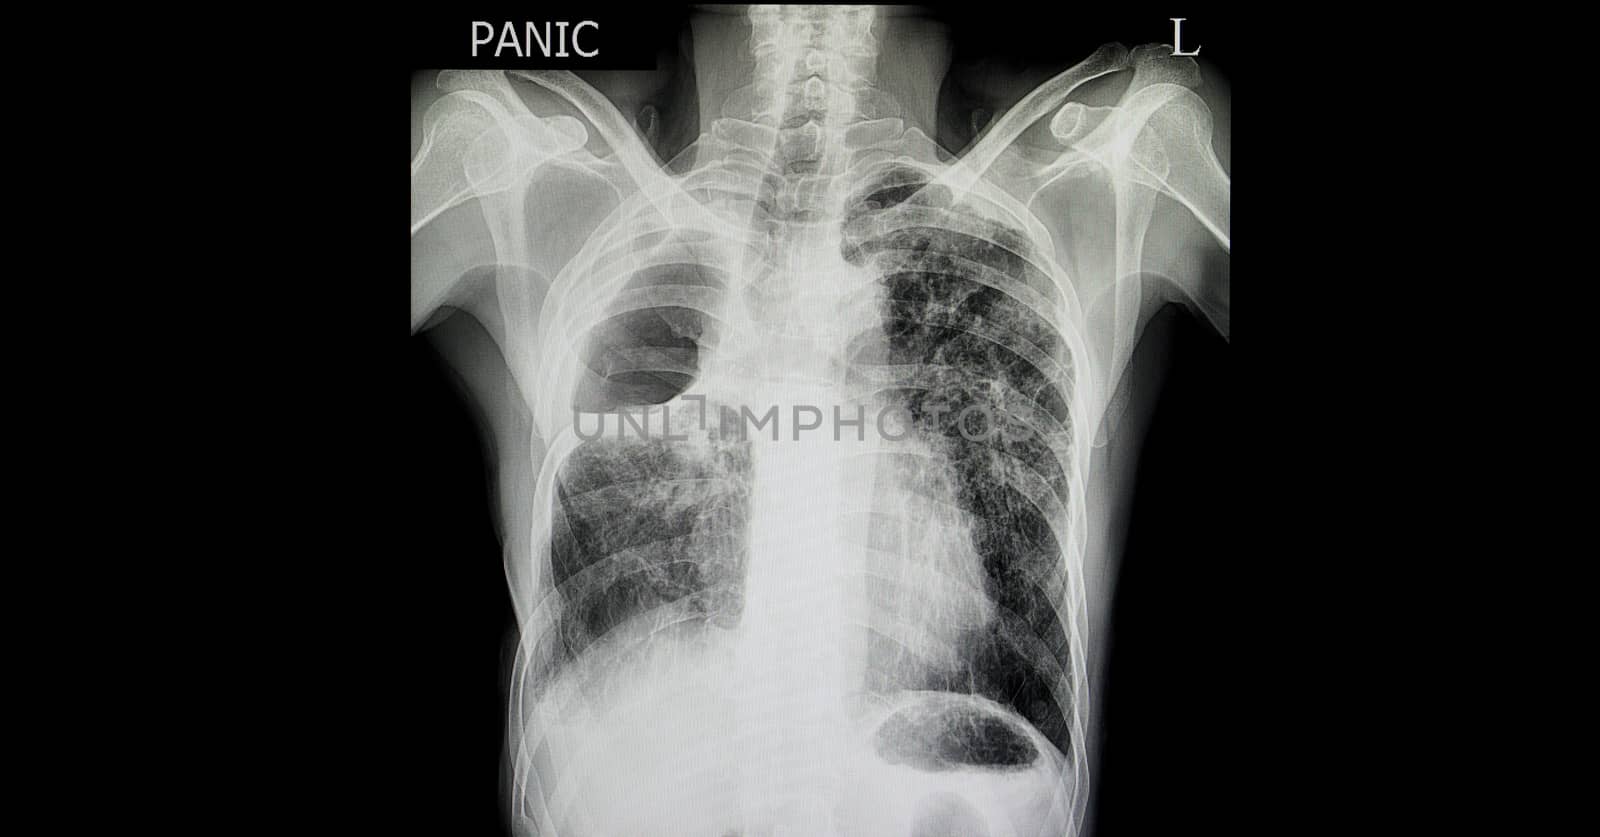 A chest film of a patient with a history of right upper lung resection showing a large cavity. Tuberculous or malignant lymphangitic spreading of the remaining lung tissues with left lower pulmmonary nodule is noted.